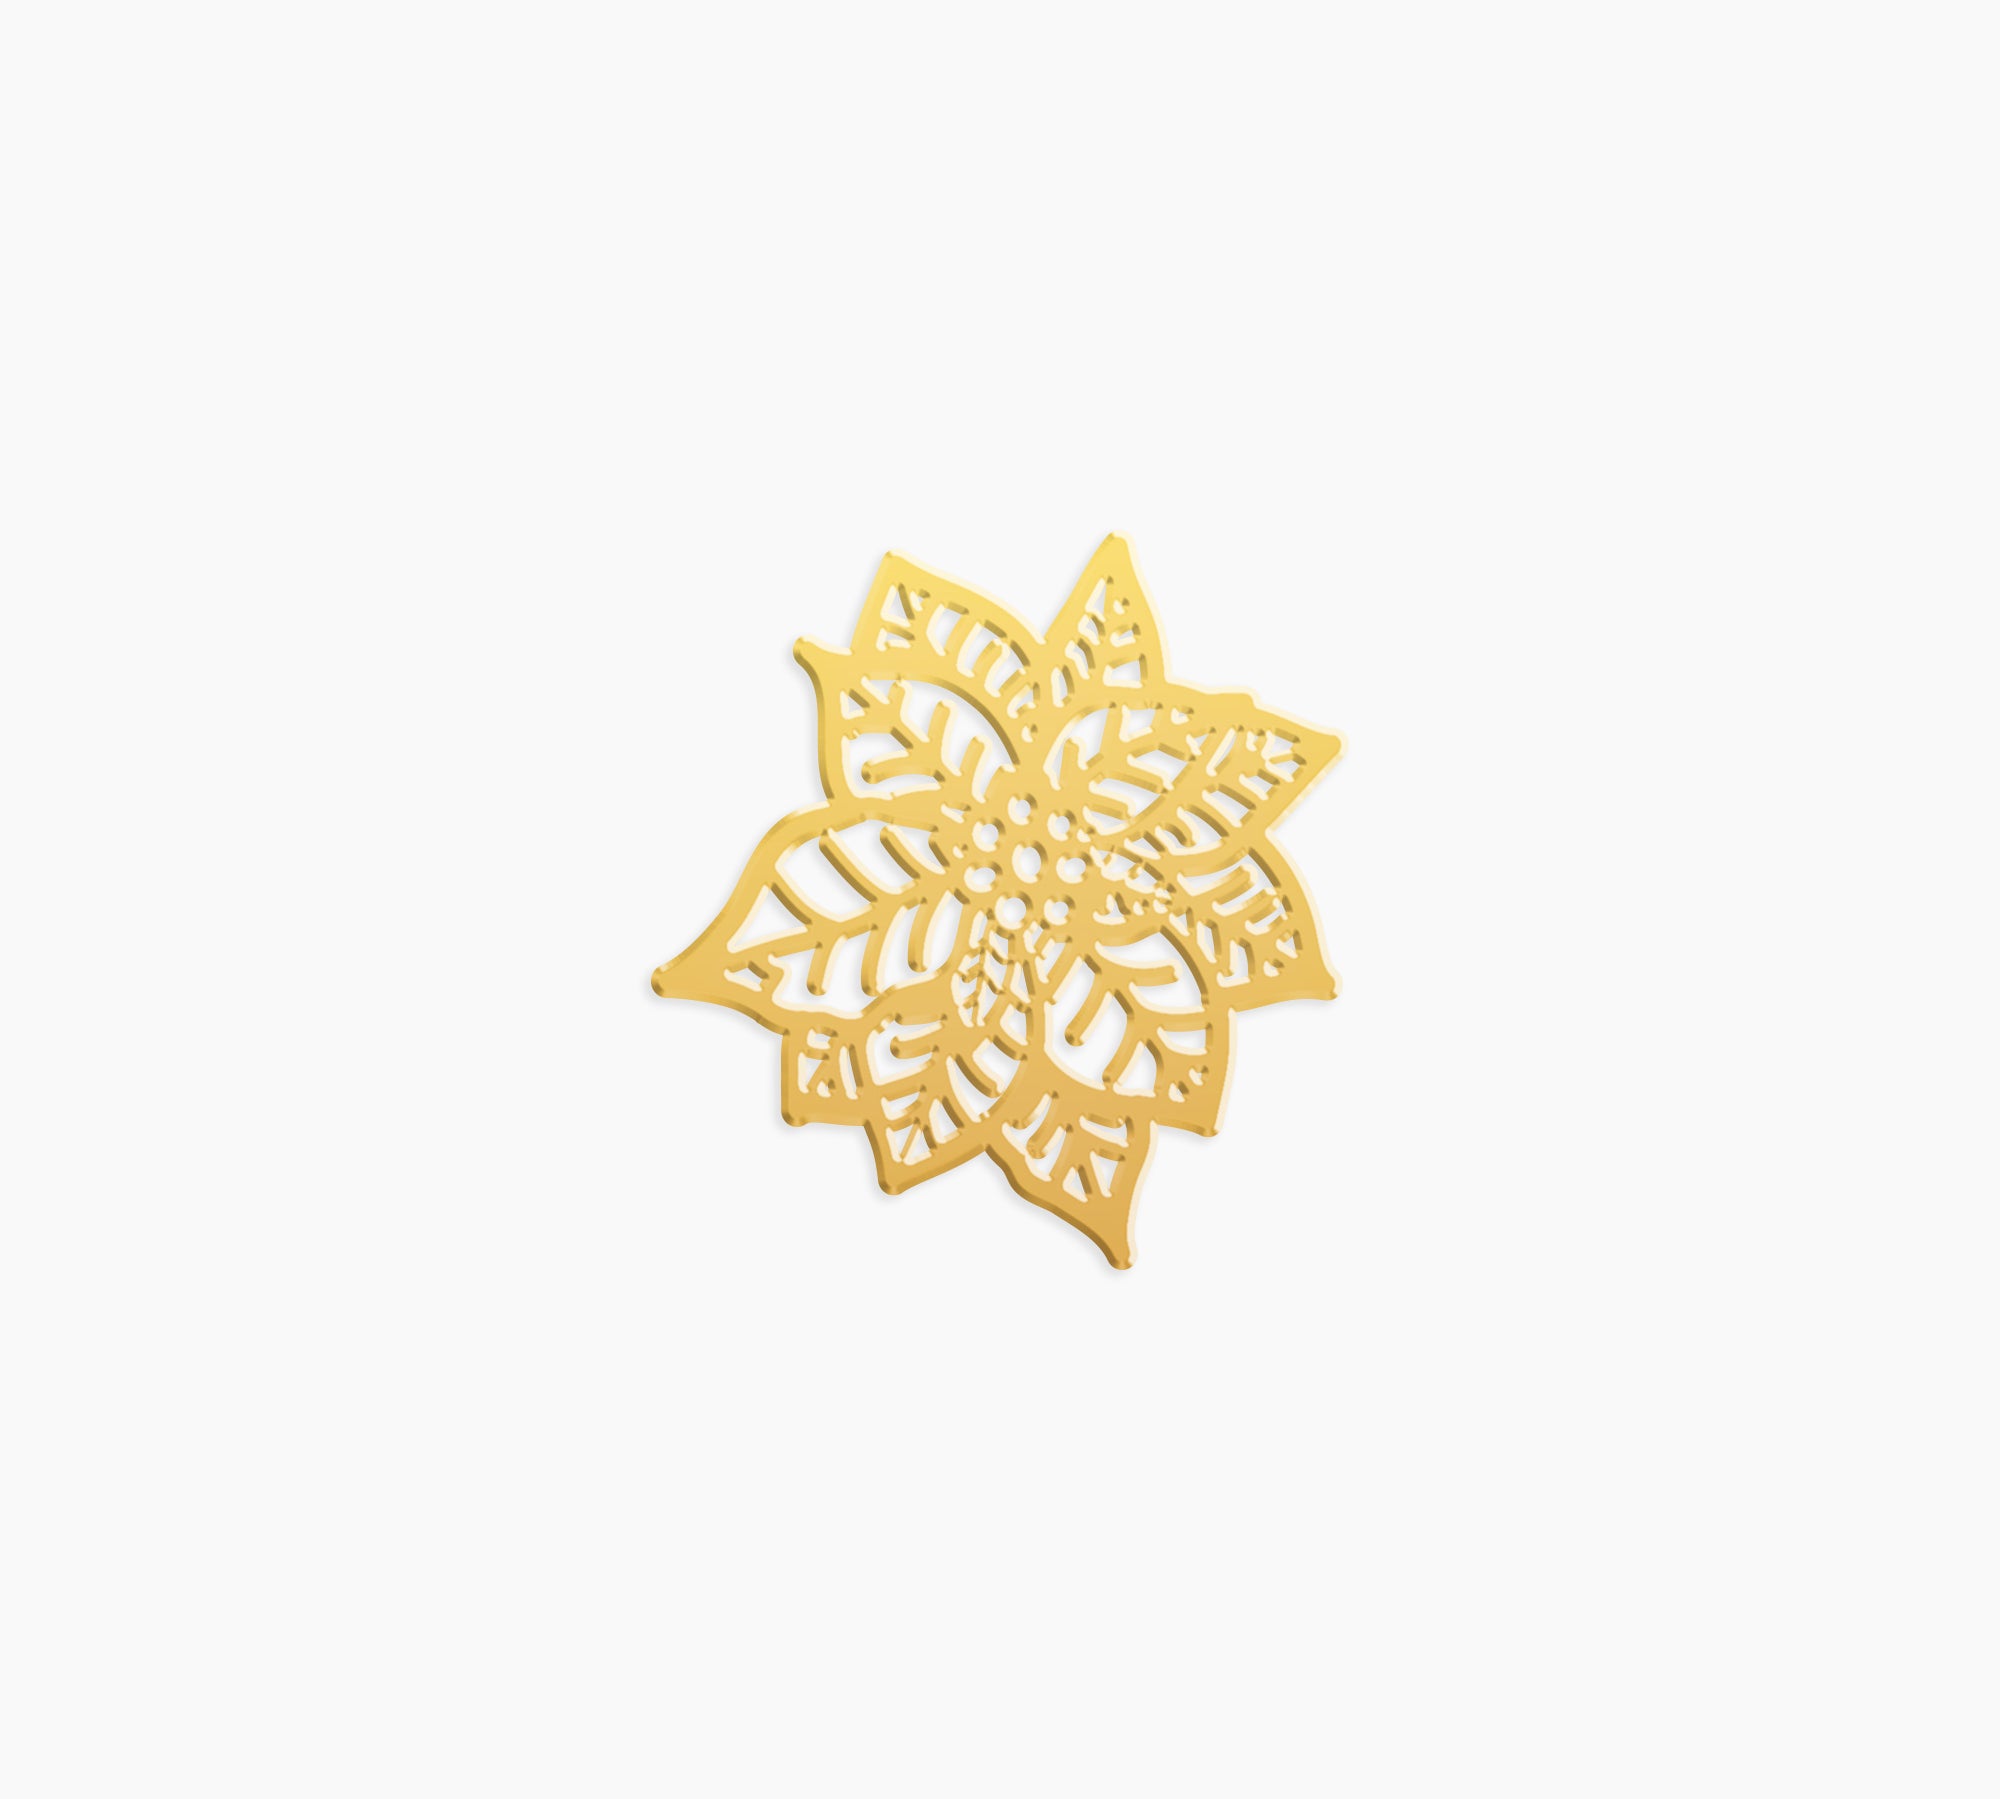 Poinsettia Charm - High Quality, Affordable, Whimsical, Hand Drawn Individual Charms for a Custom Locket - December Birthday Gift - Available in Gold and Silver - Made in USA - Brevity Jewelry